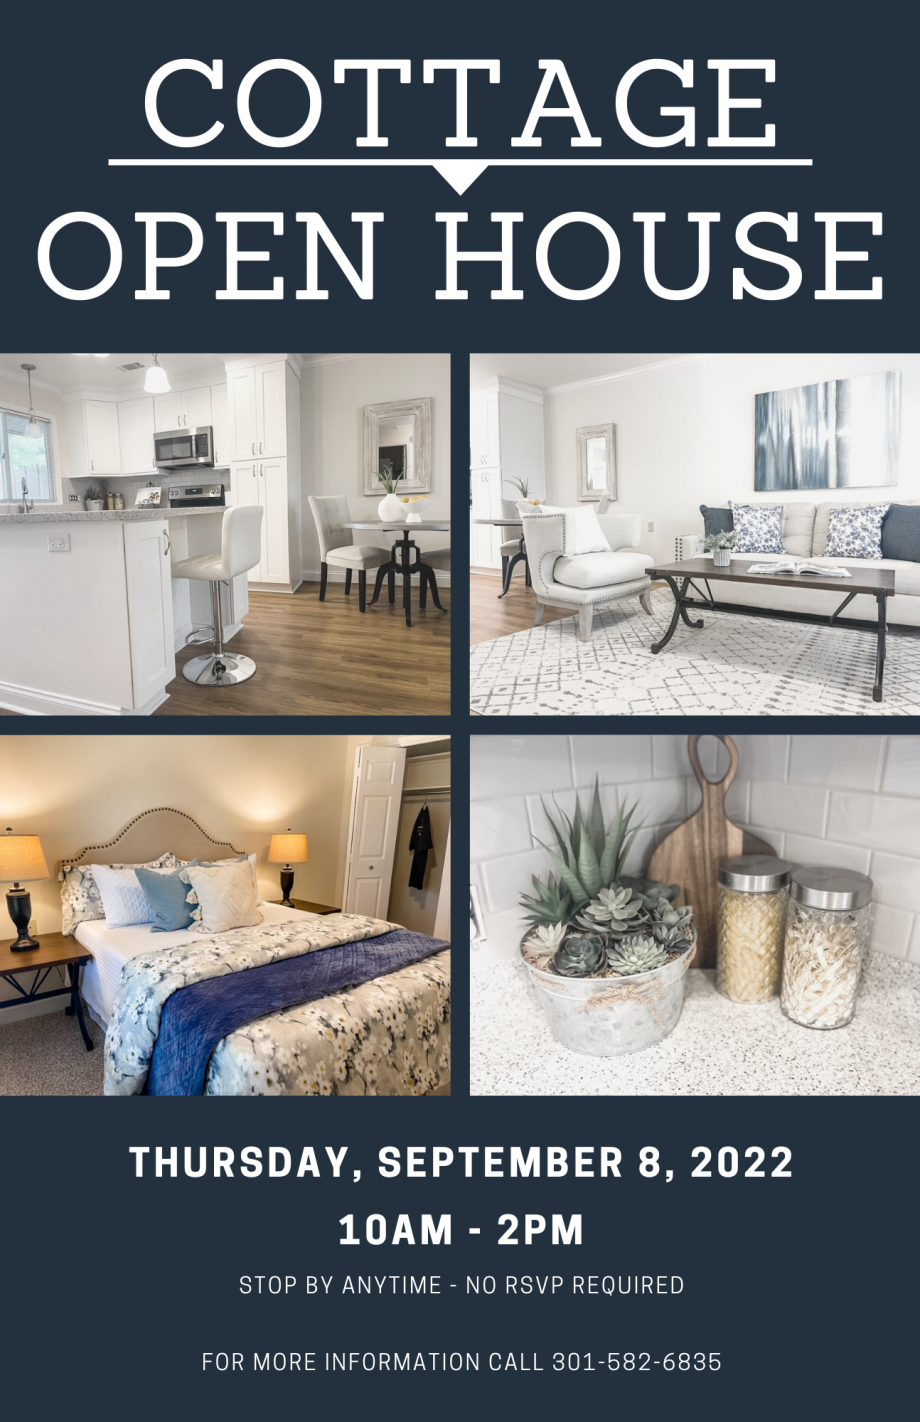 Cottage Open House September 8th 10am - 2pm